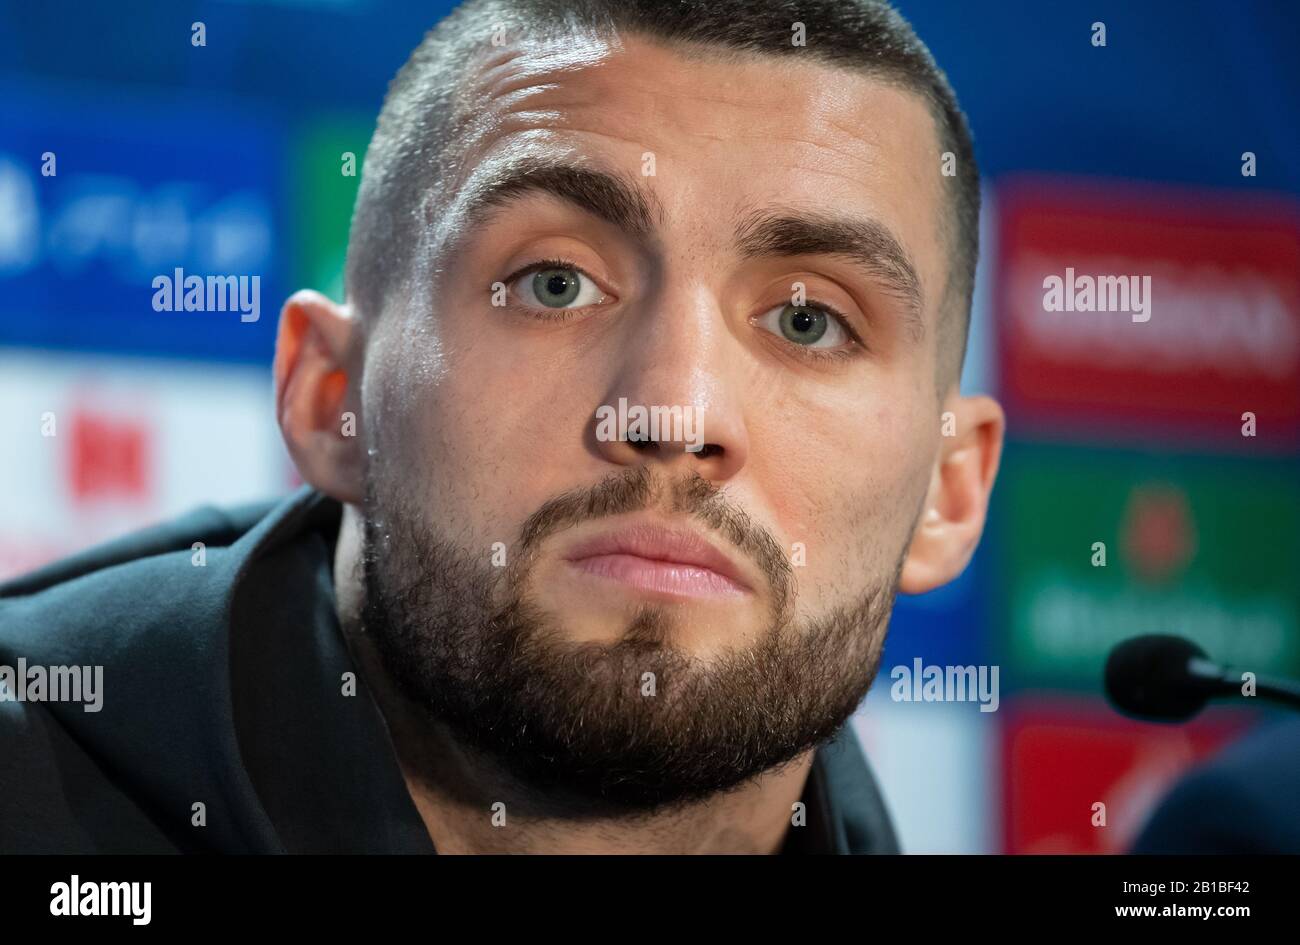 24 February 2020, Great Britain, London: Football: Champions League, Chelsea FC - FC Bayern Munich, knockout round, round of 16, first leg, Chelsea press conference at Stamford Bridge stadium. Mateo Kovacic from Chelsea is on the podium. Photo: Sven Hoppe/dpa Stock Photo